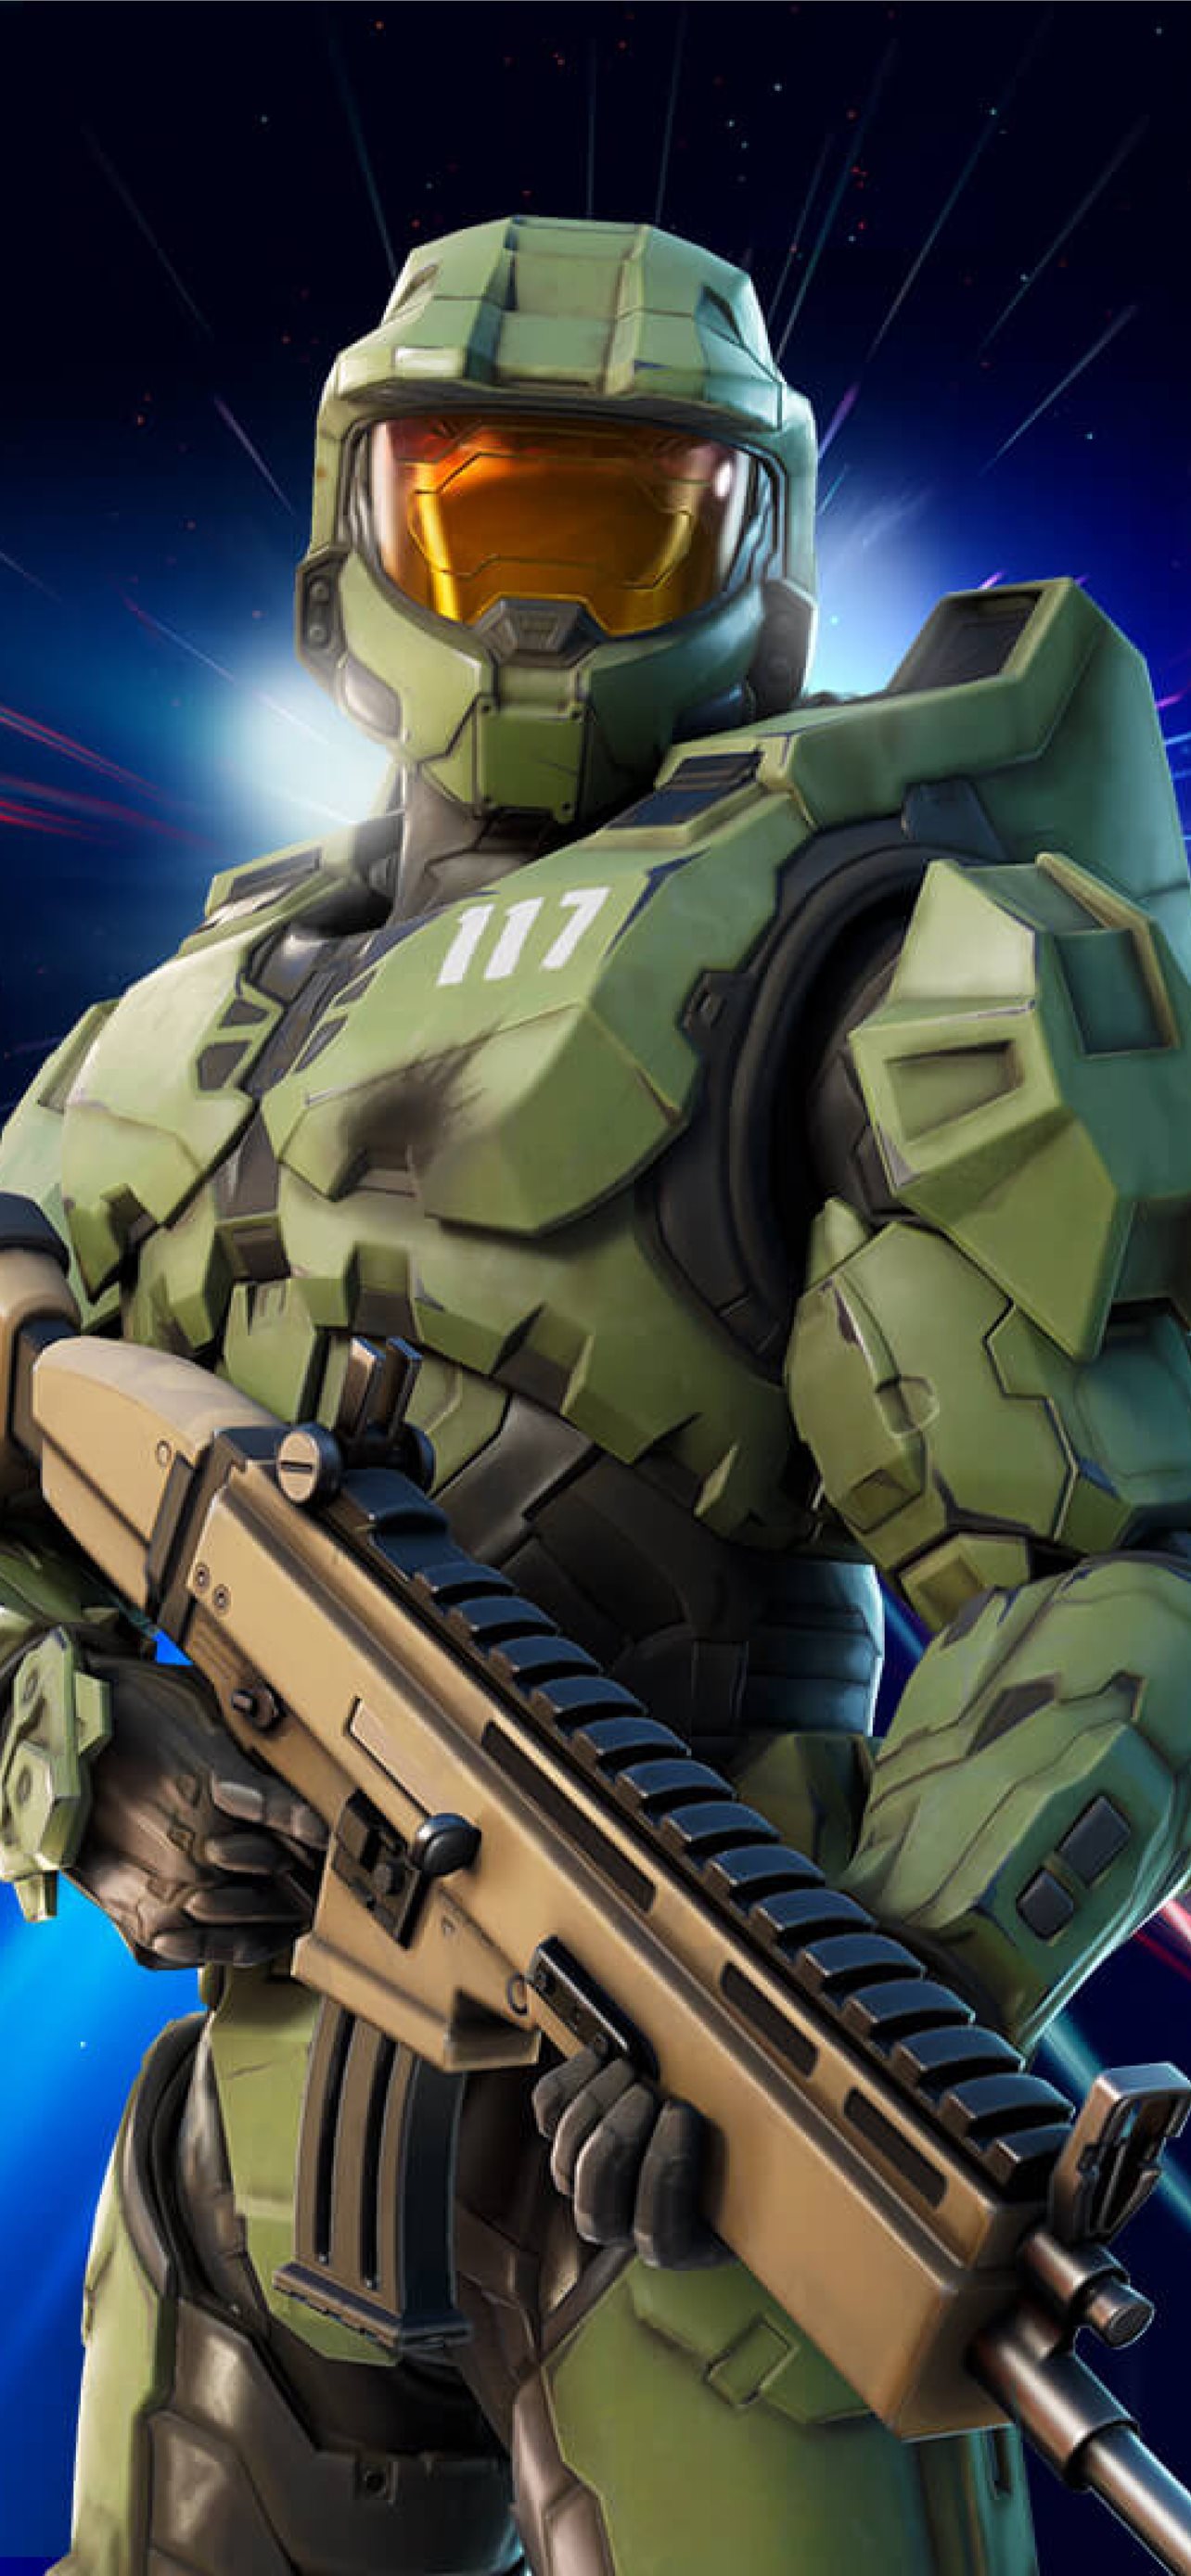 Halo Master Chief Art Wallpapers  Cool Halo Wallpaper for iPhone